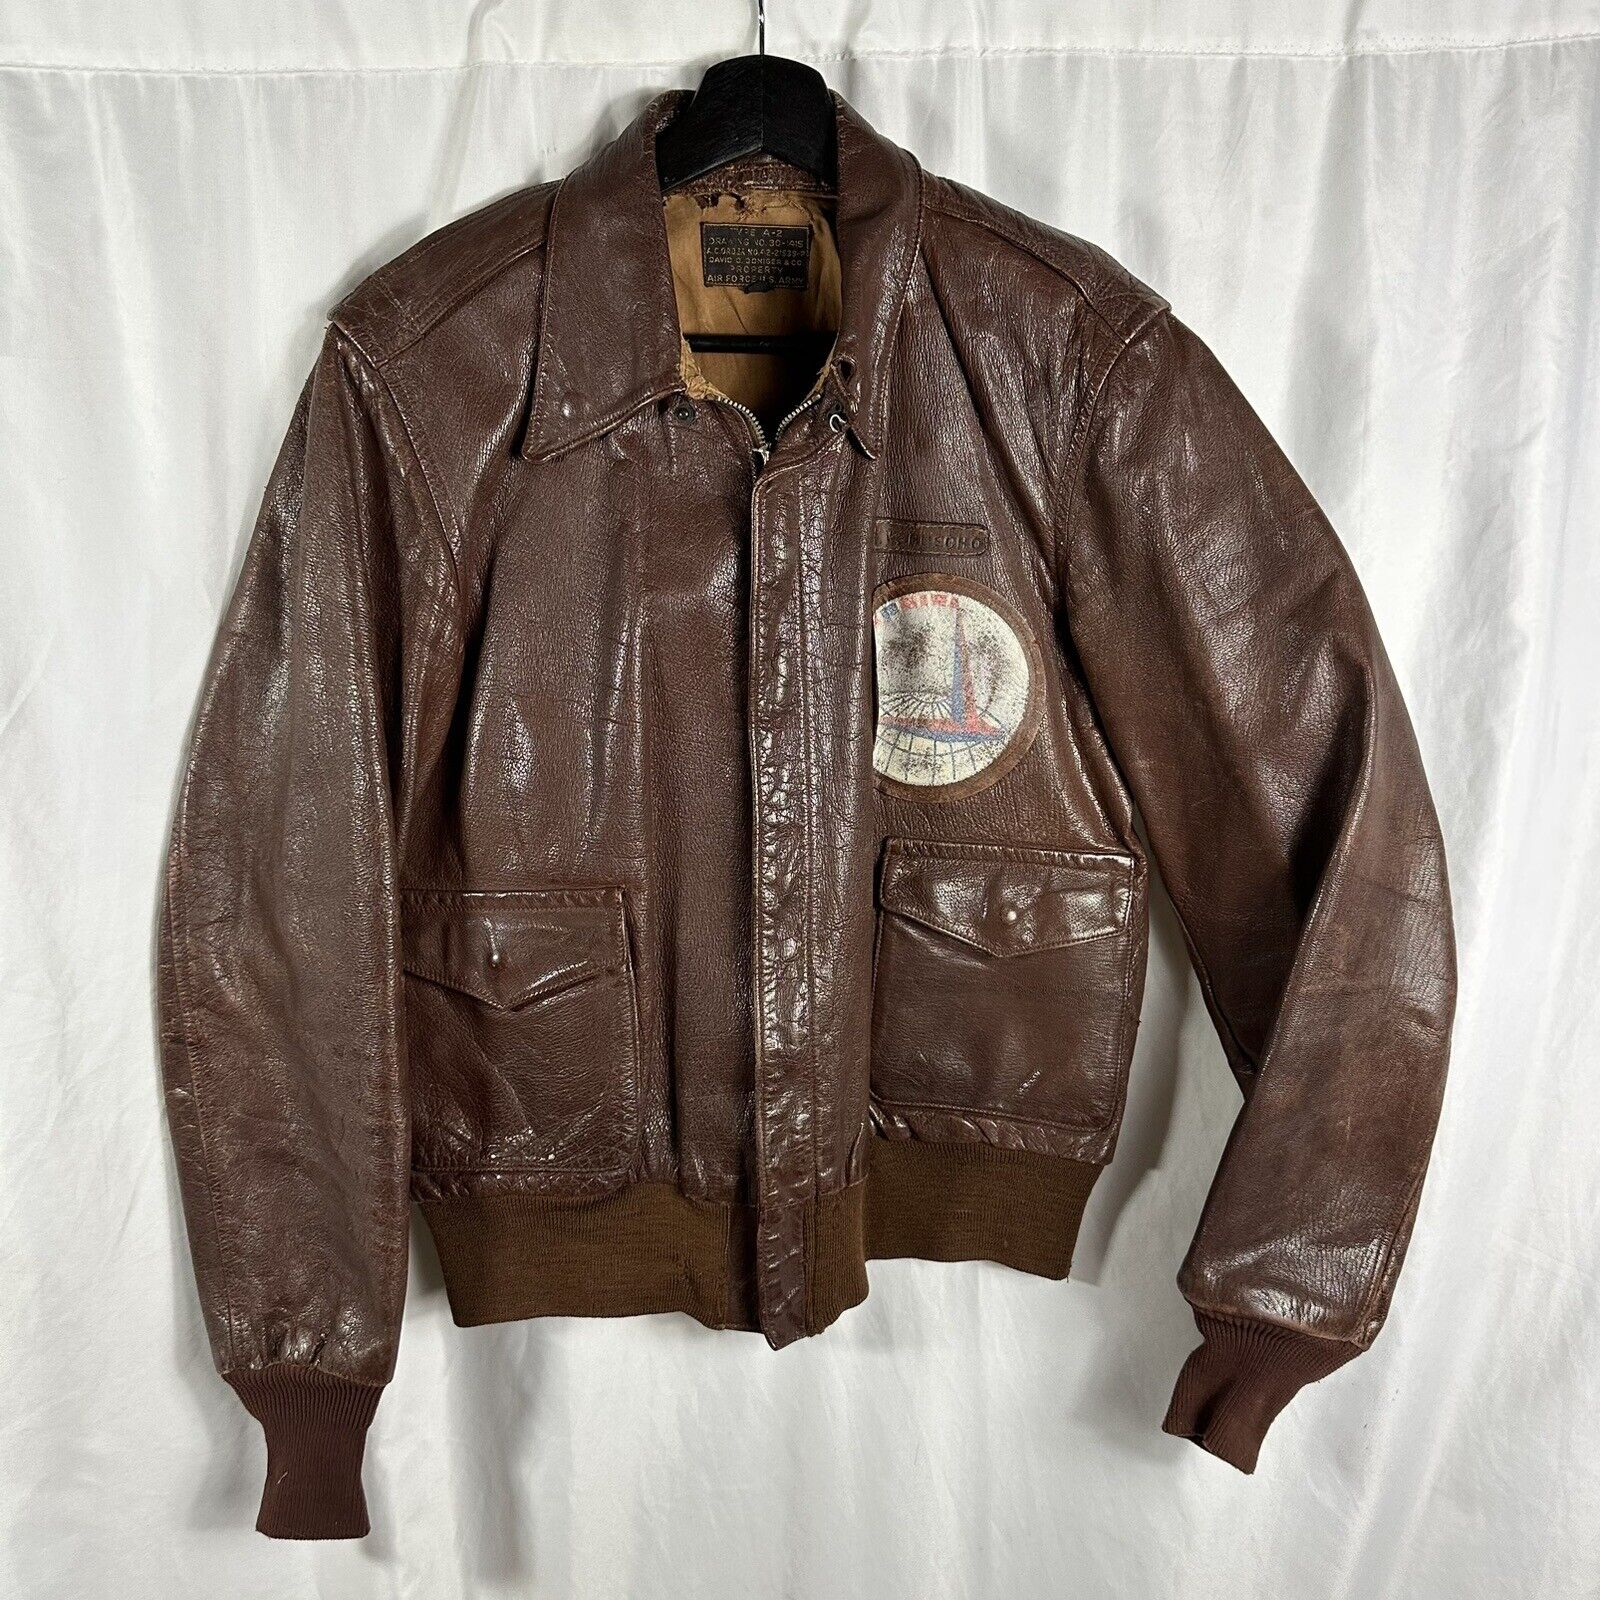 WWII Named Patched A-2 Flight Jacket Transport Command Near Mint All Original